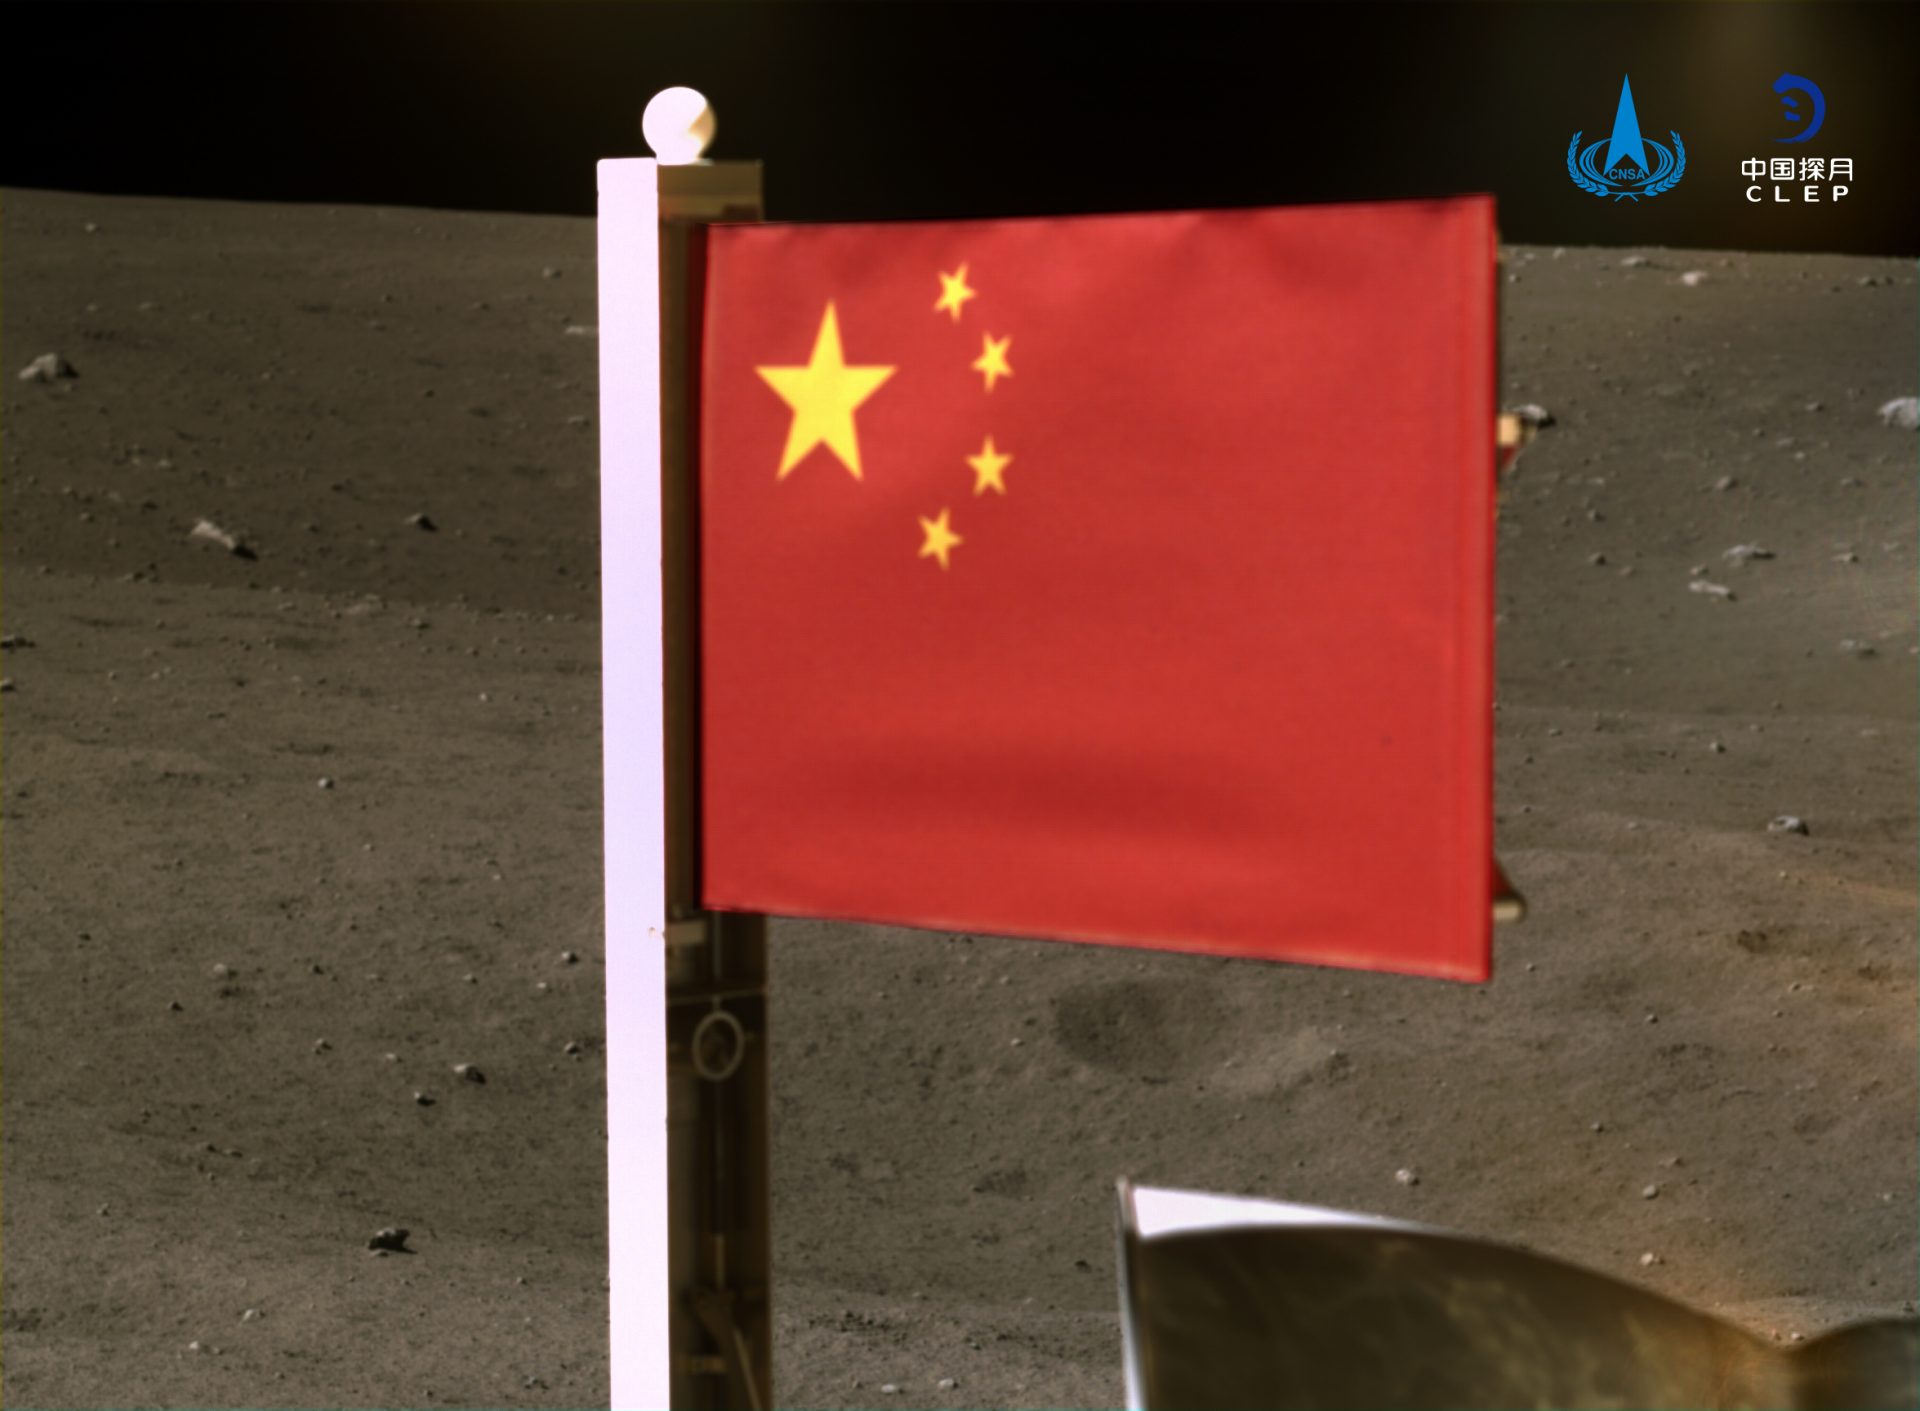 China plants its flag on the moon with Chang’e 5 lunar lander (photo, video)